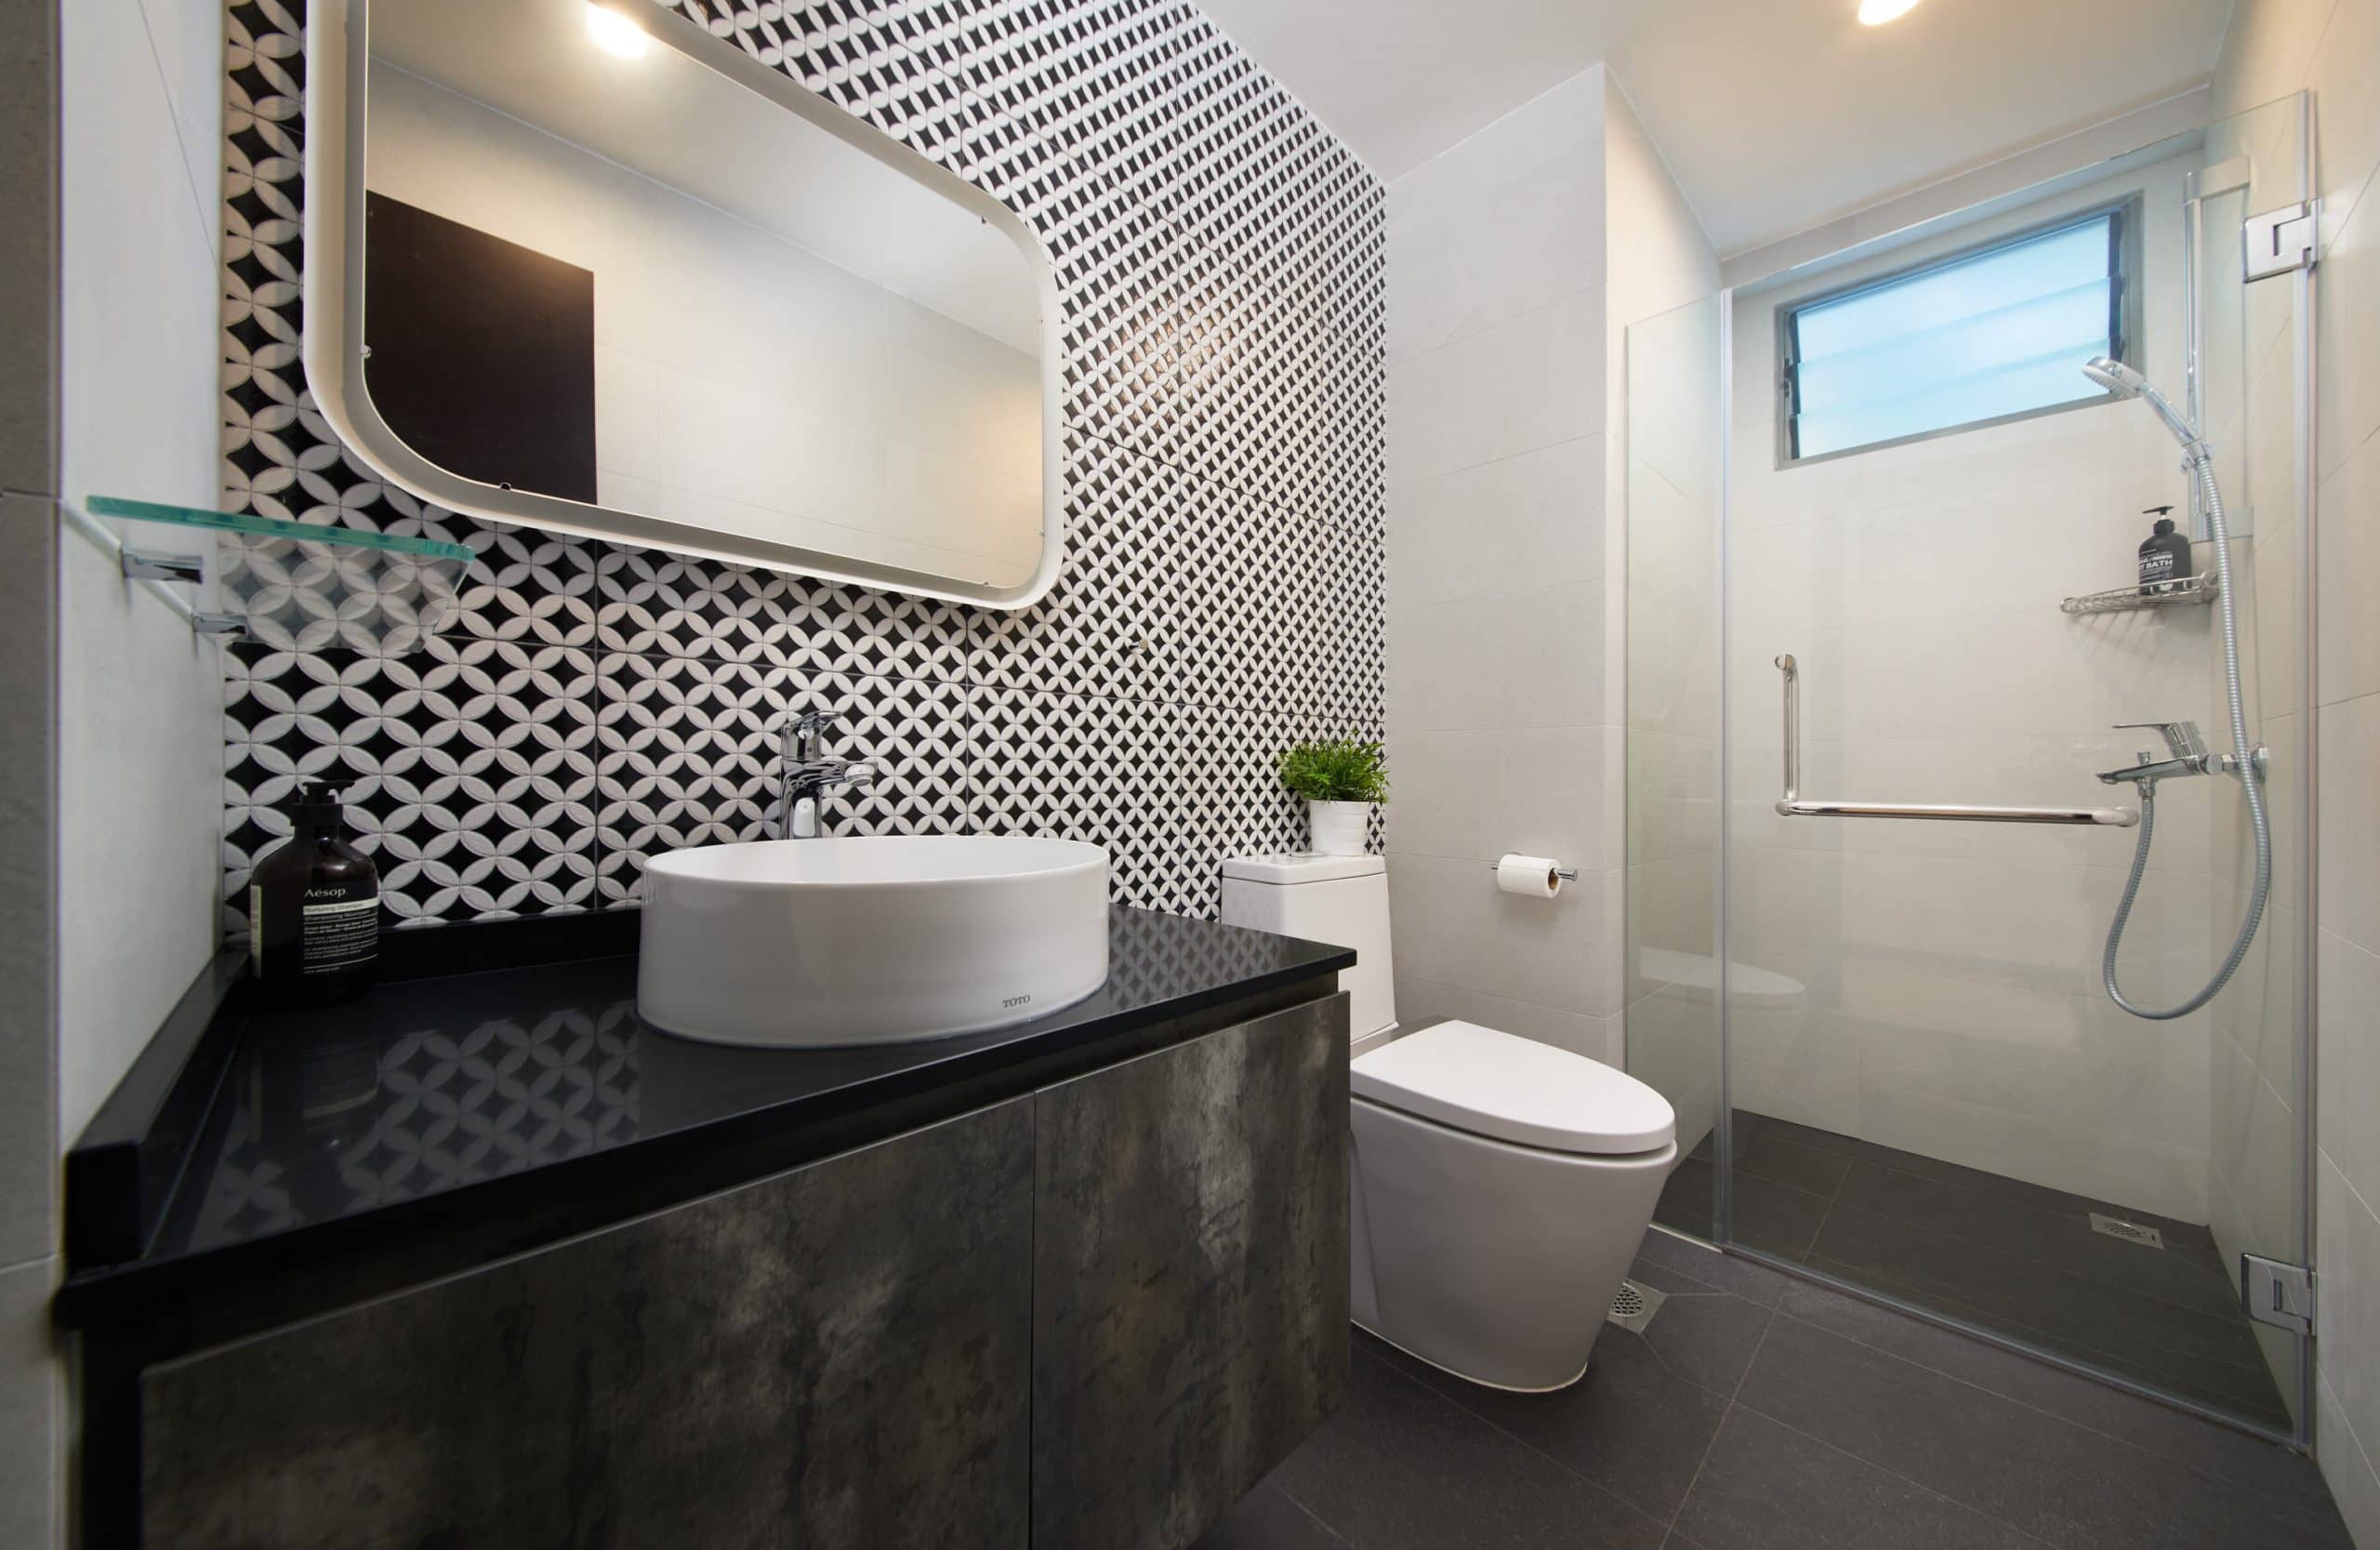 29 Black Bathrooms for an Ultra Chic Oasis